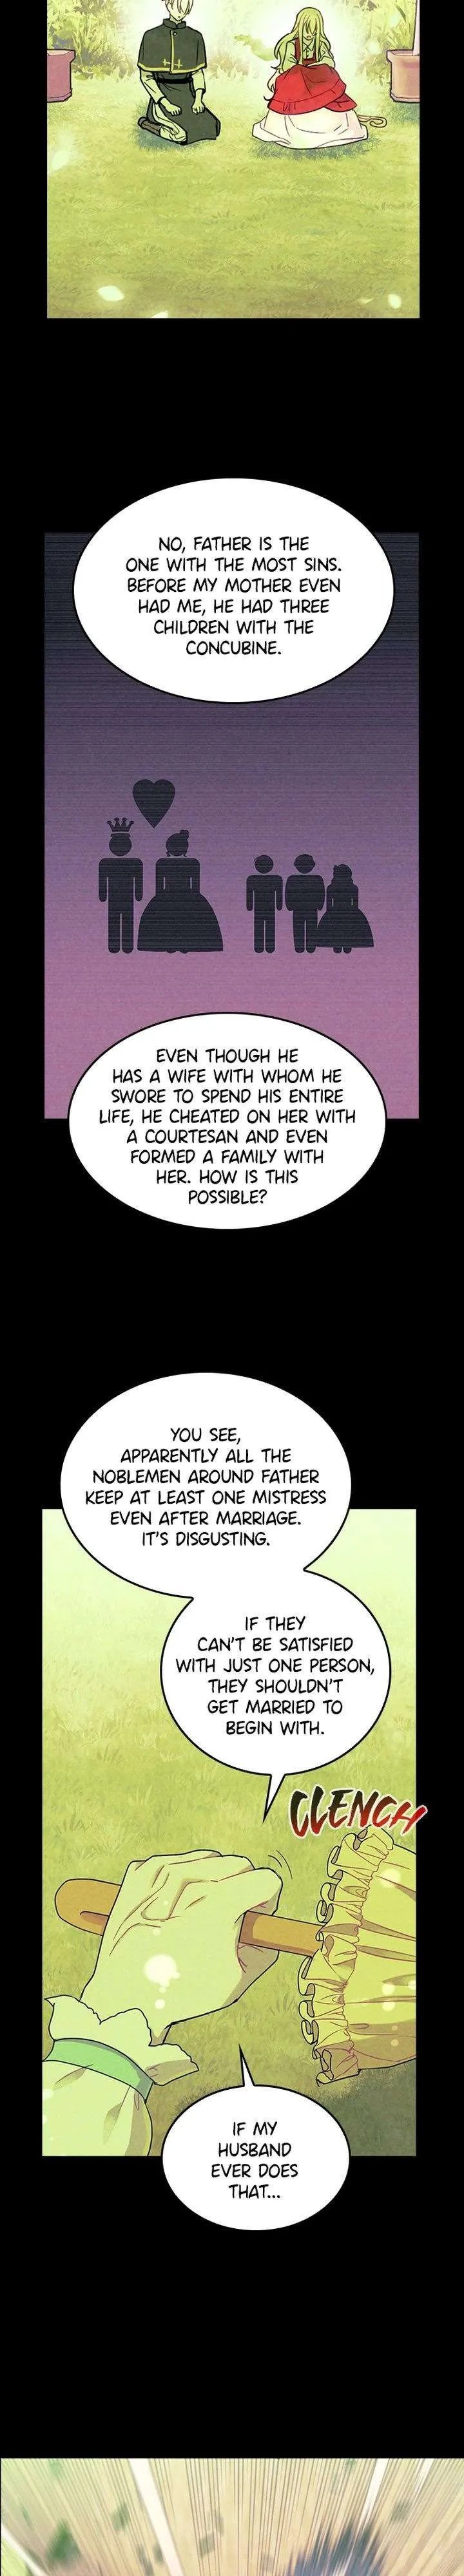 The Predatory Marriage Between the King and the Paladin Chapter 14 - Page 1